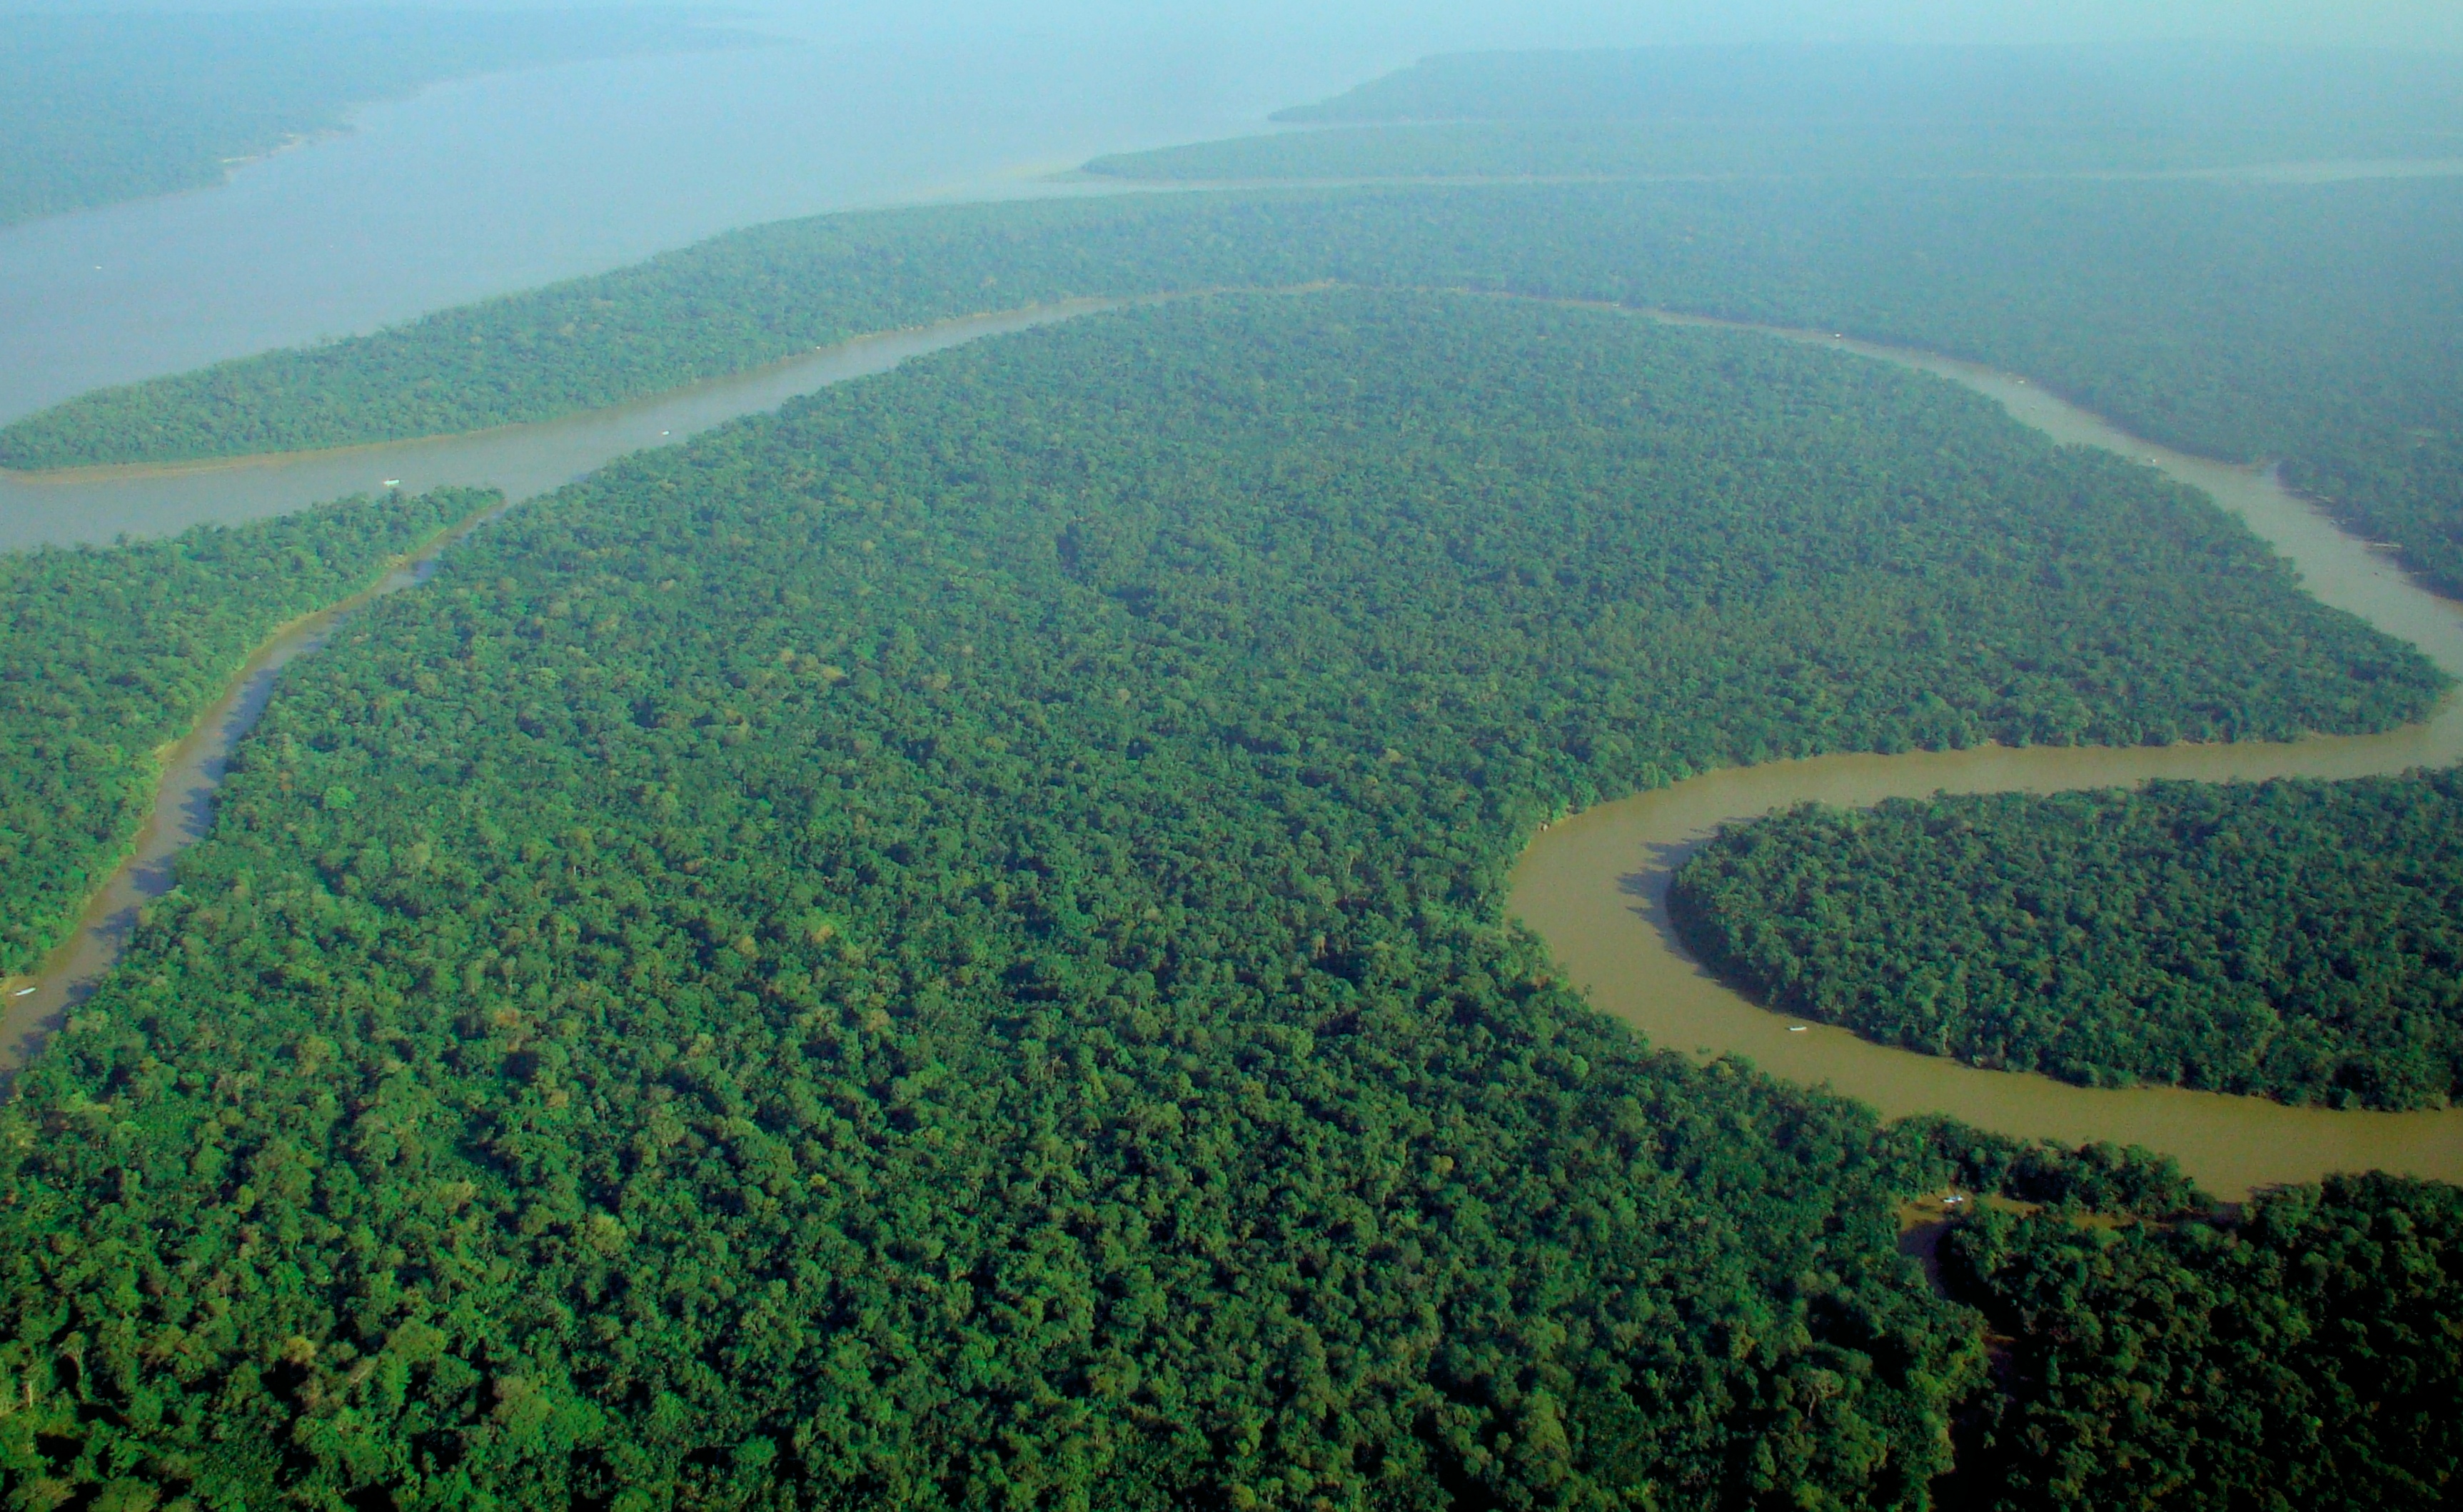 http://sciworthy.com/wp-content/uploads/2014/06/Aerial_view_of_the_Amazon_Rainforest.jpg